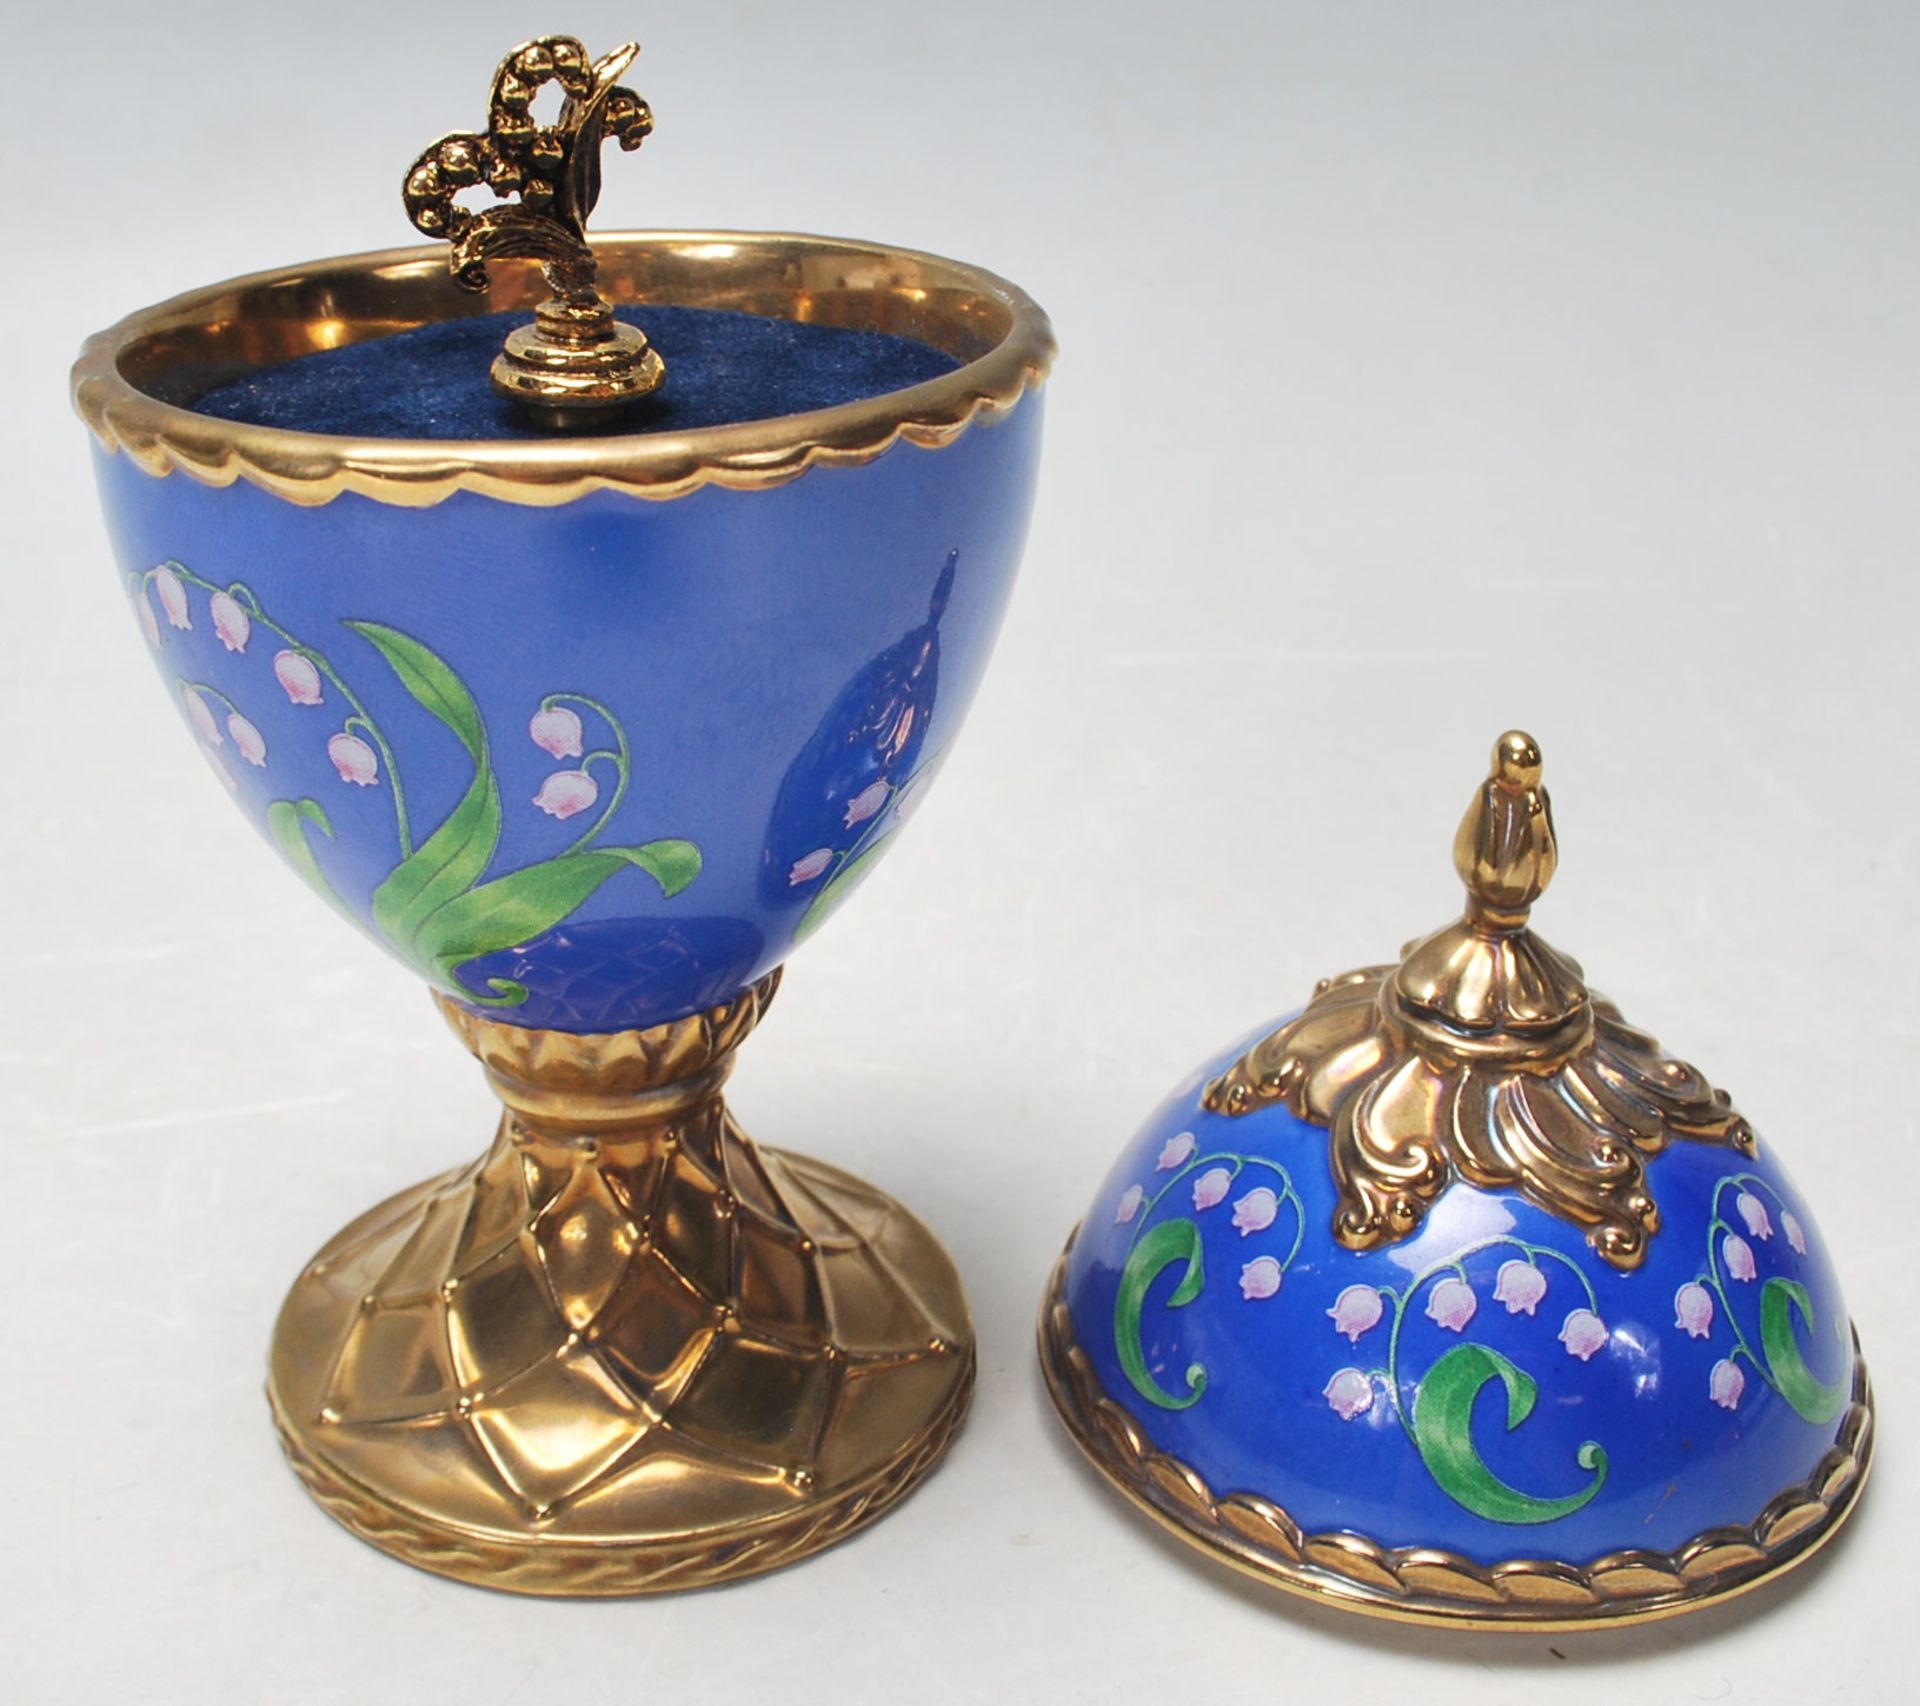 FABERGE EGG - HOUSE OF FABERGE - MUSICAL EGG - LILY OF THE VALLEY - TCHIAKOVSKY’S DANCE OF THE SUGAR - Image 3 of 5